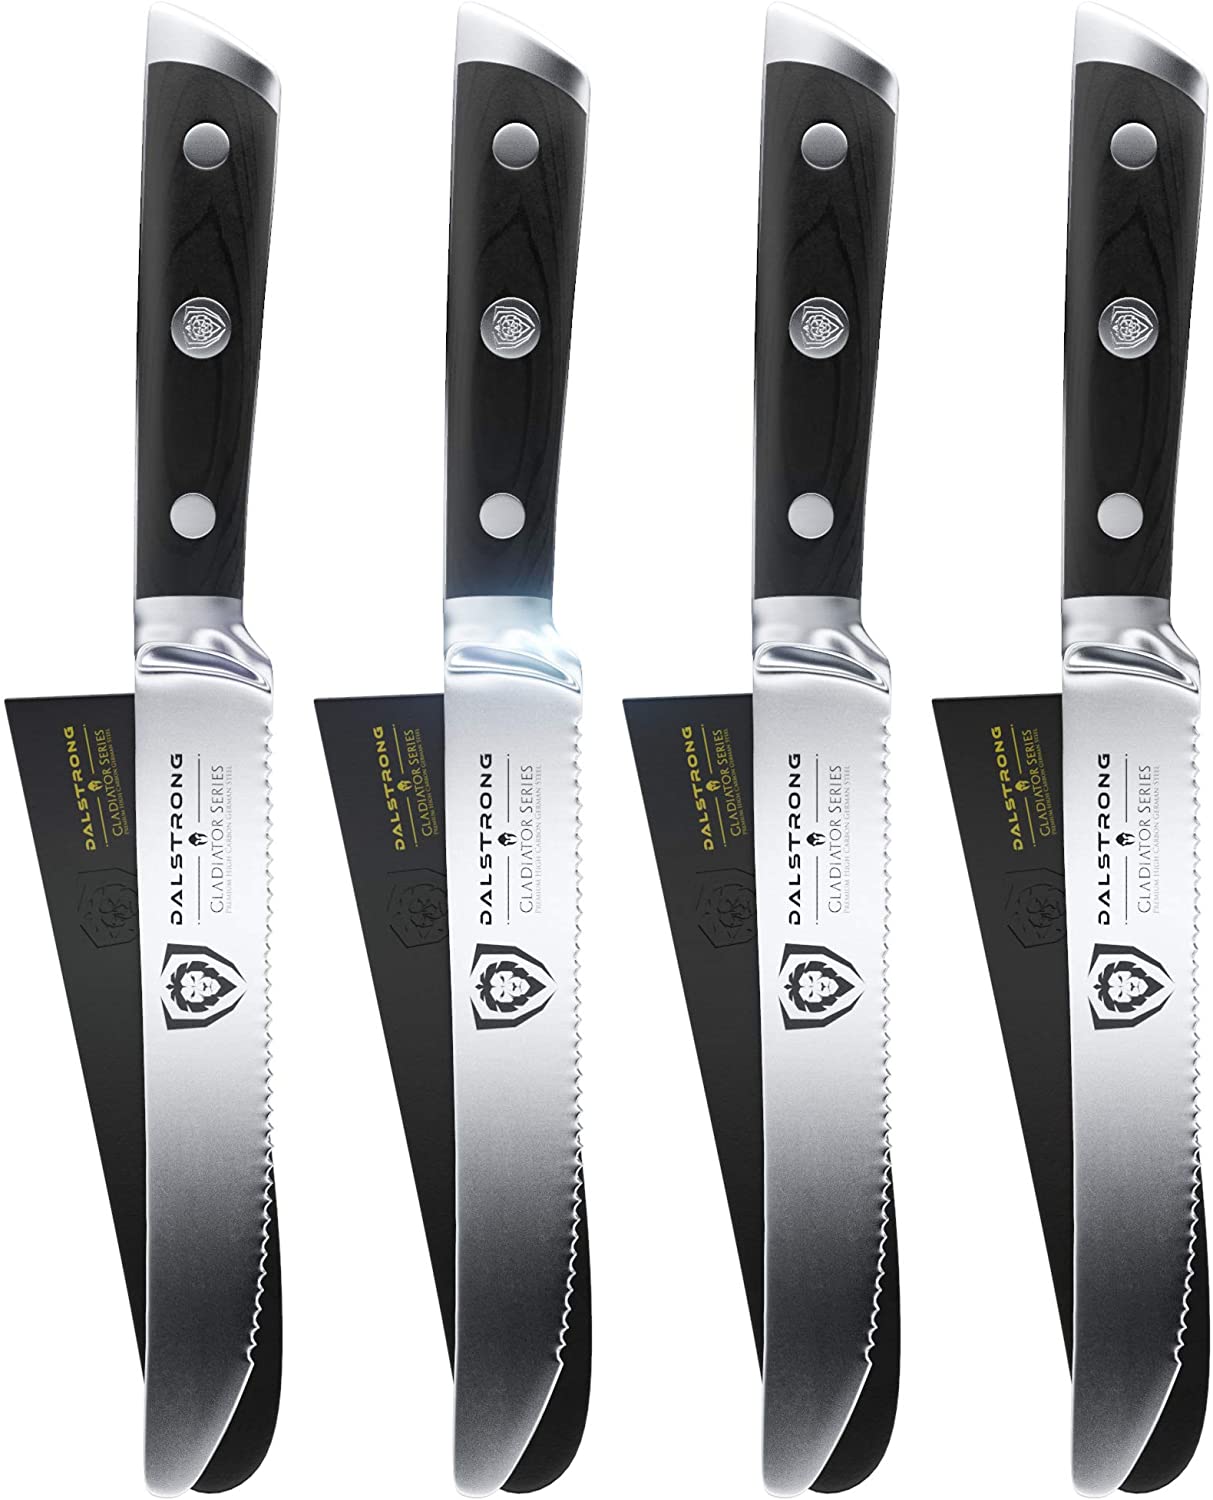 Dalstrong-4-Piece-Steak-Knives